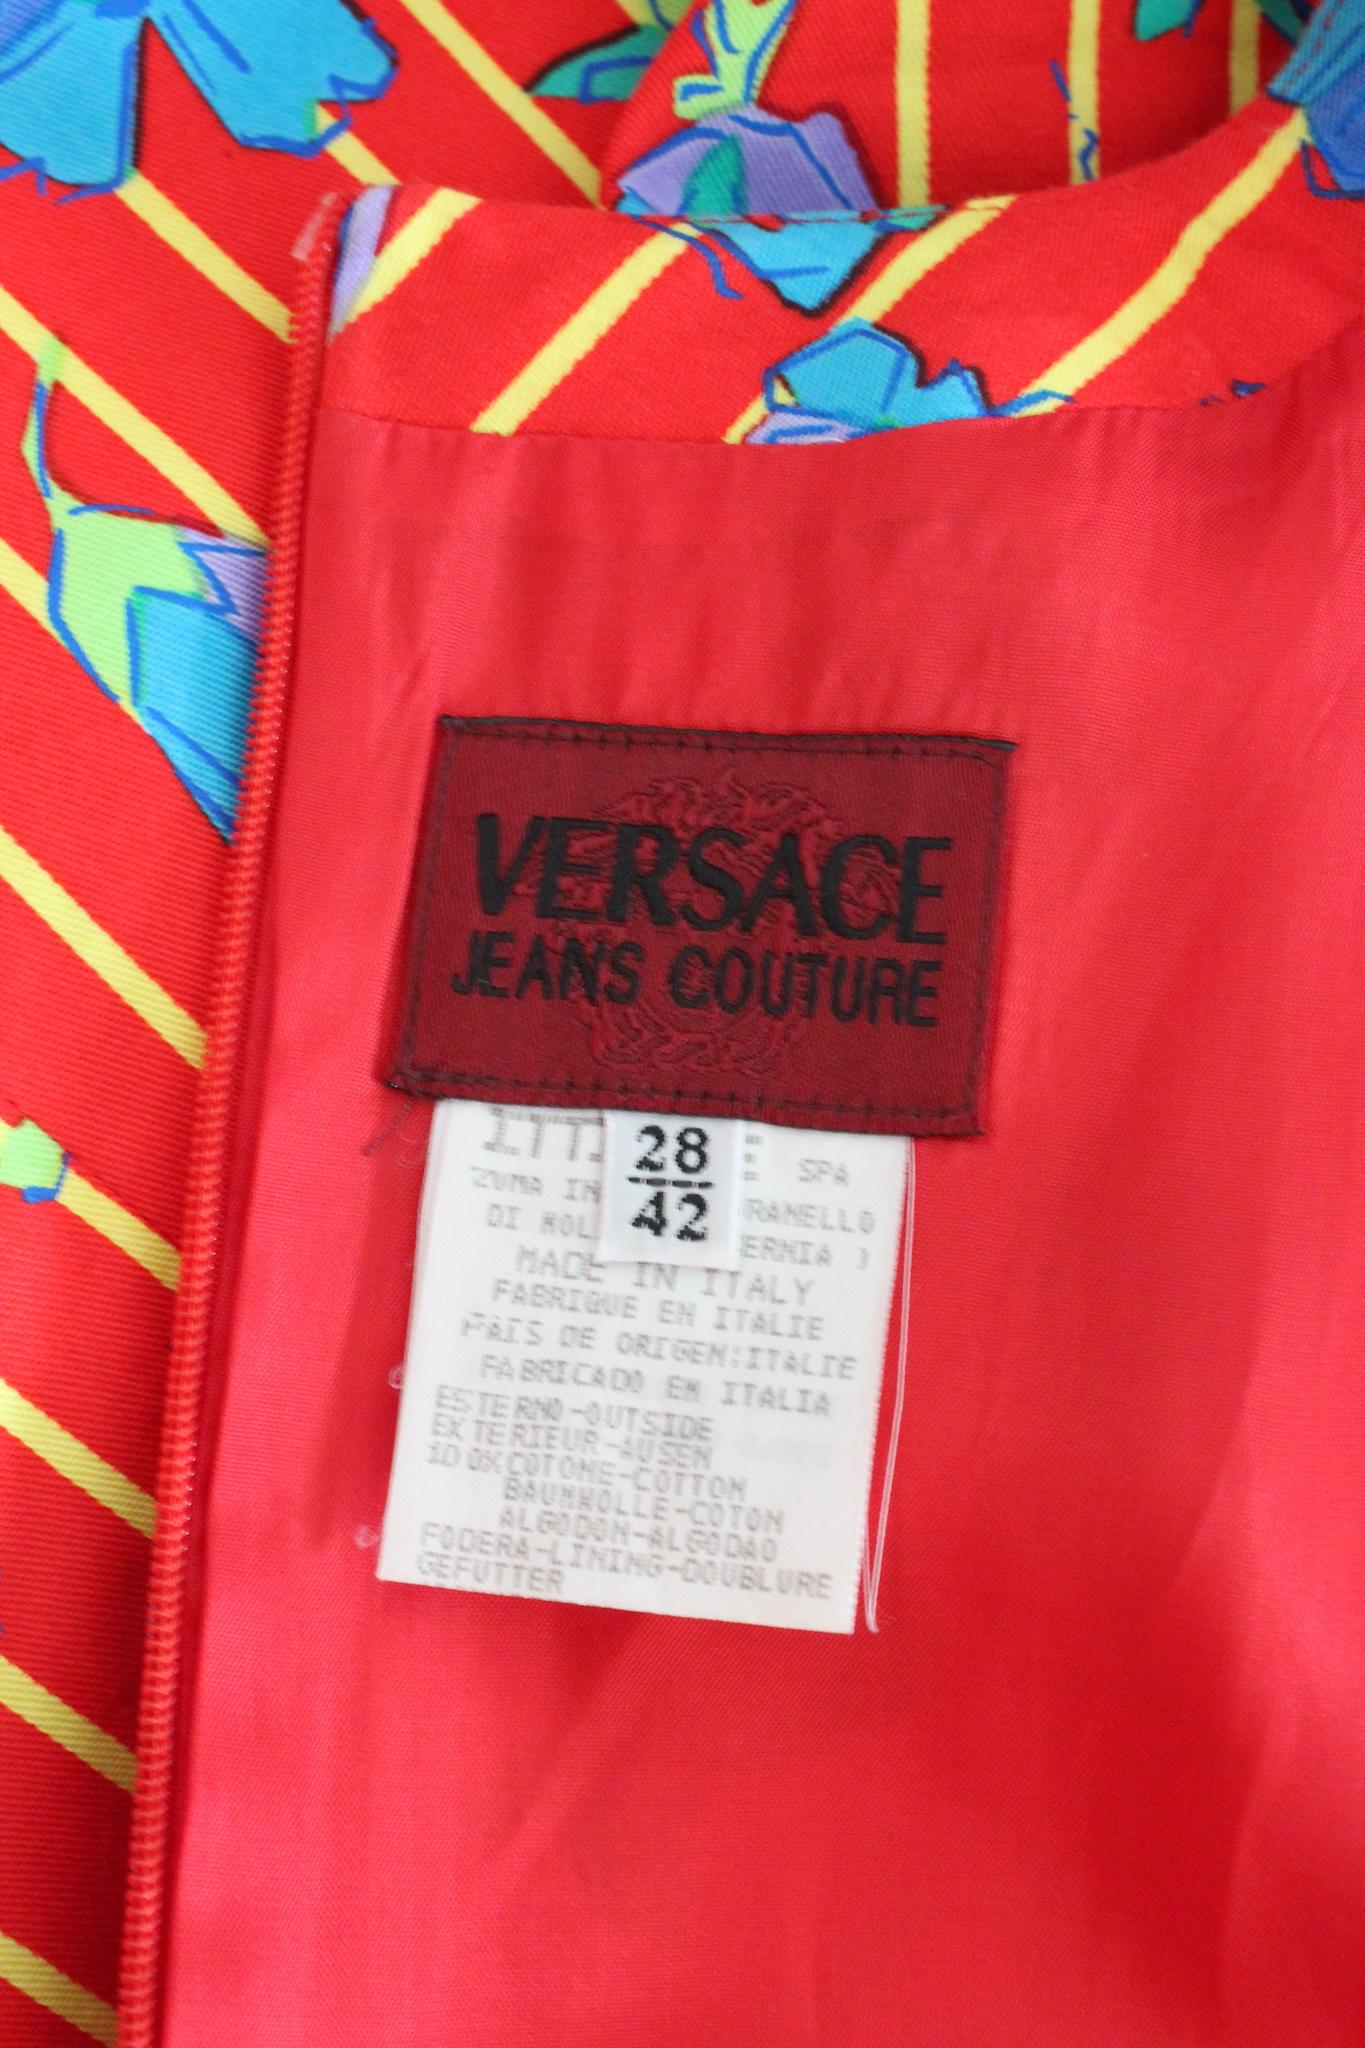 Versace Jeans Couture 90s vintage dress. Red sheath dress with yellow stripes and blue flowers. 100% cotton fabric. Made in Italy.

Size: 42 It 8 Us 10 Uk

Shoulder: 27 cm
Bust/Chest: 46 cm
Waist: 45 cm
Length: 85 cm